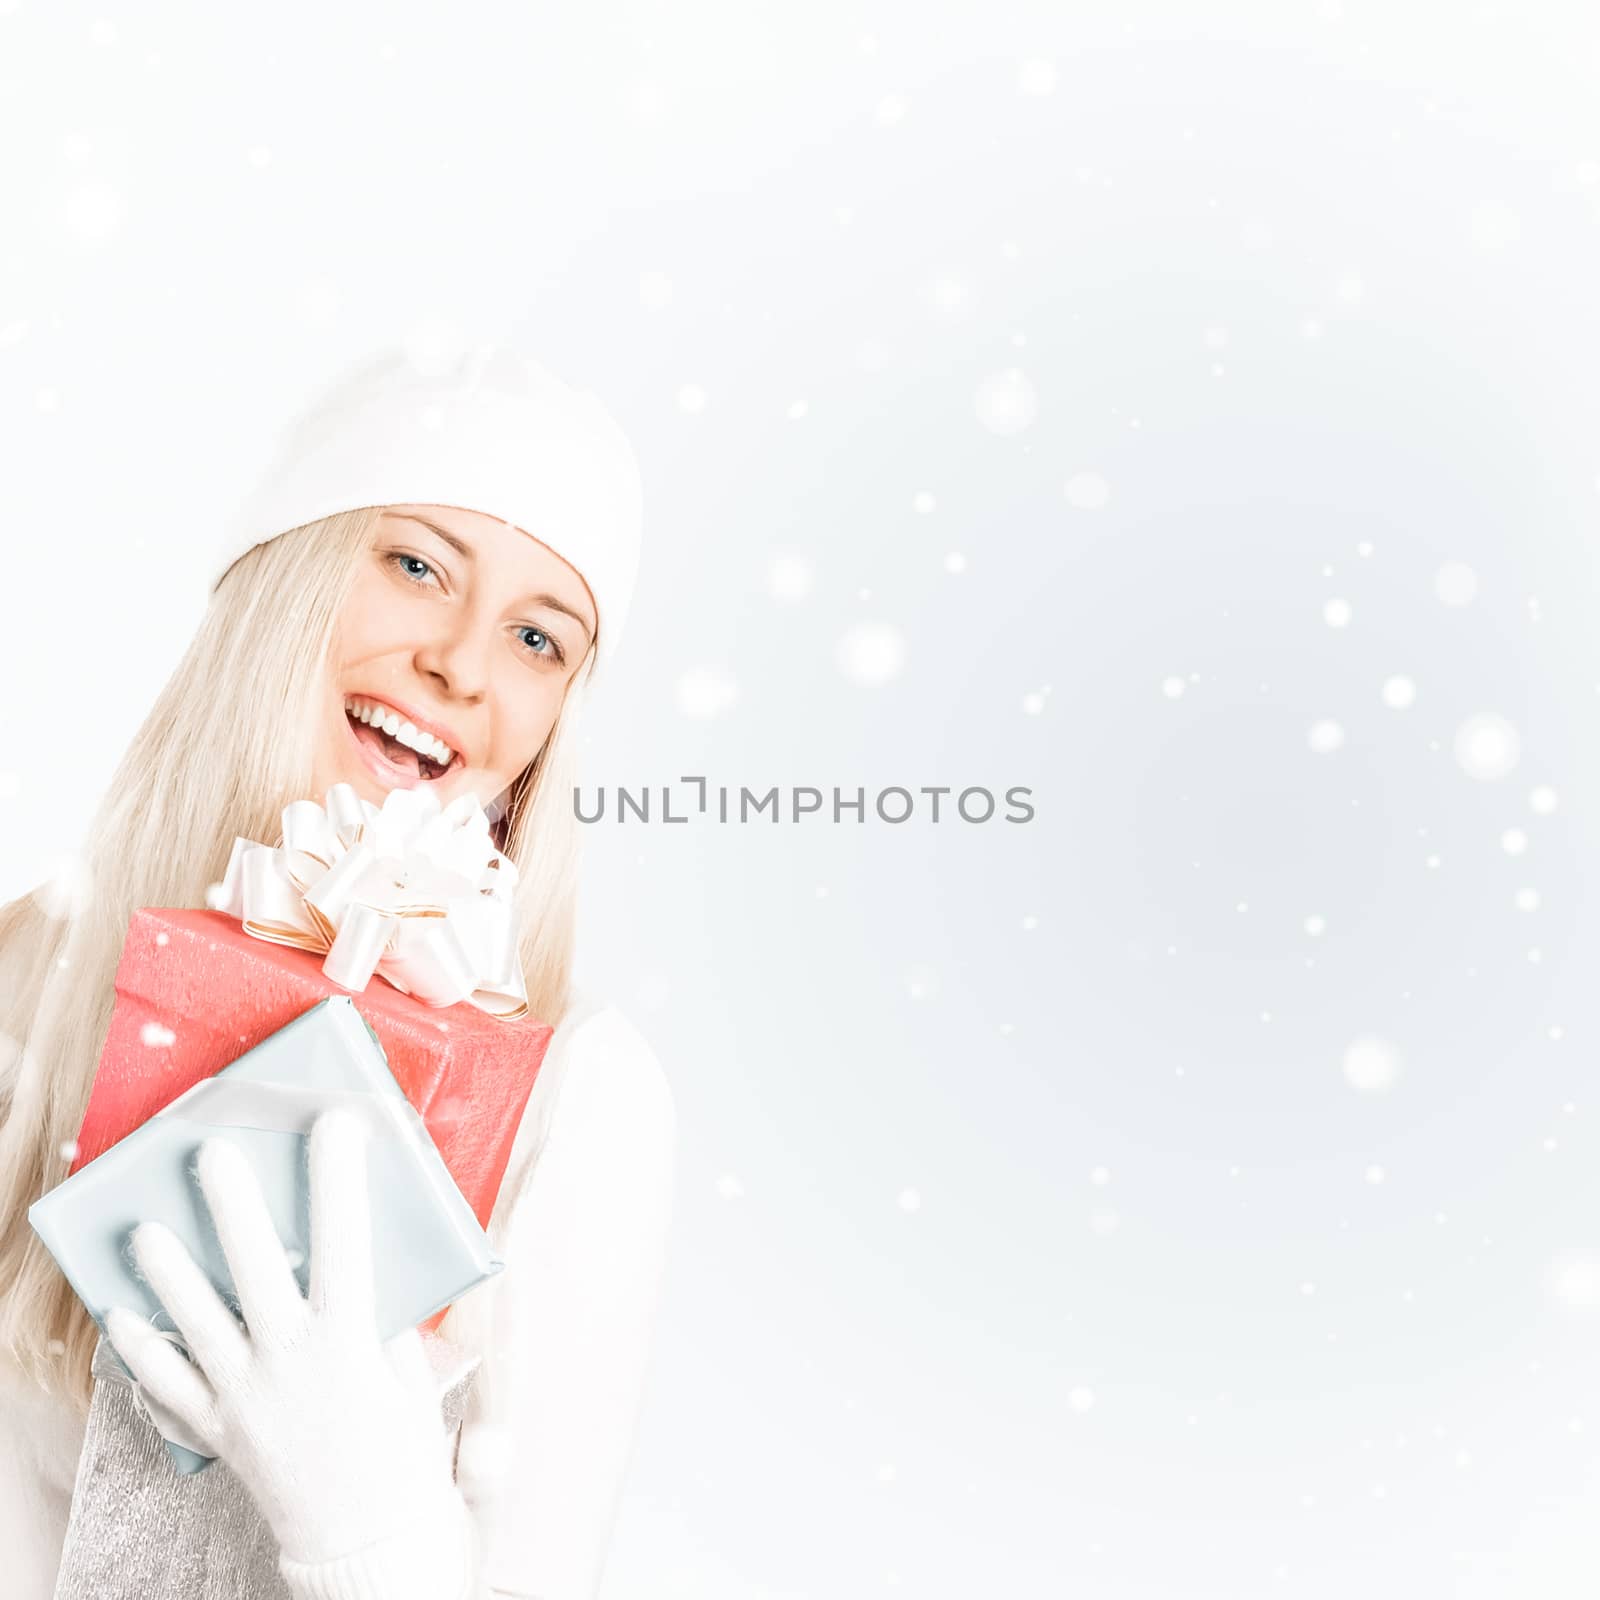 Happy woman holding Christmas gifts, silver background and snow glitter with copyspace, shopping and holidays